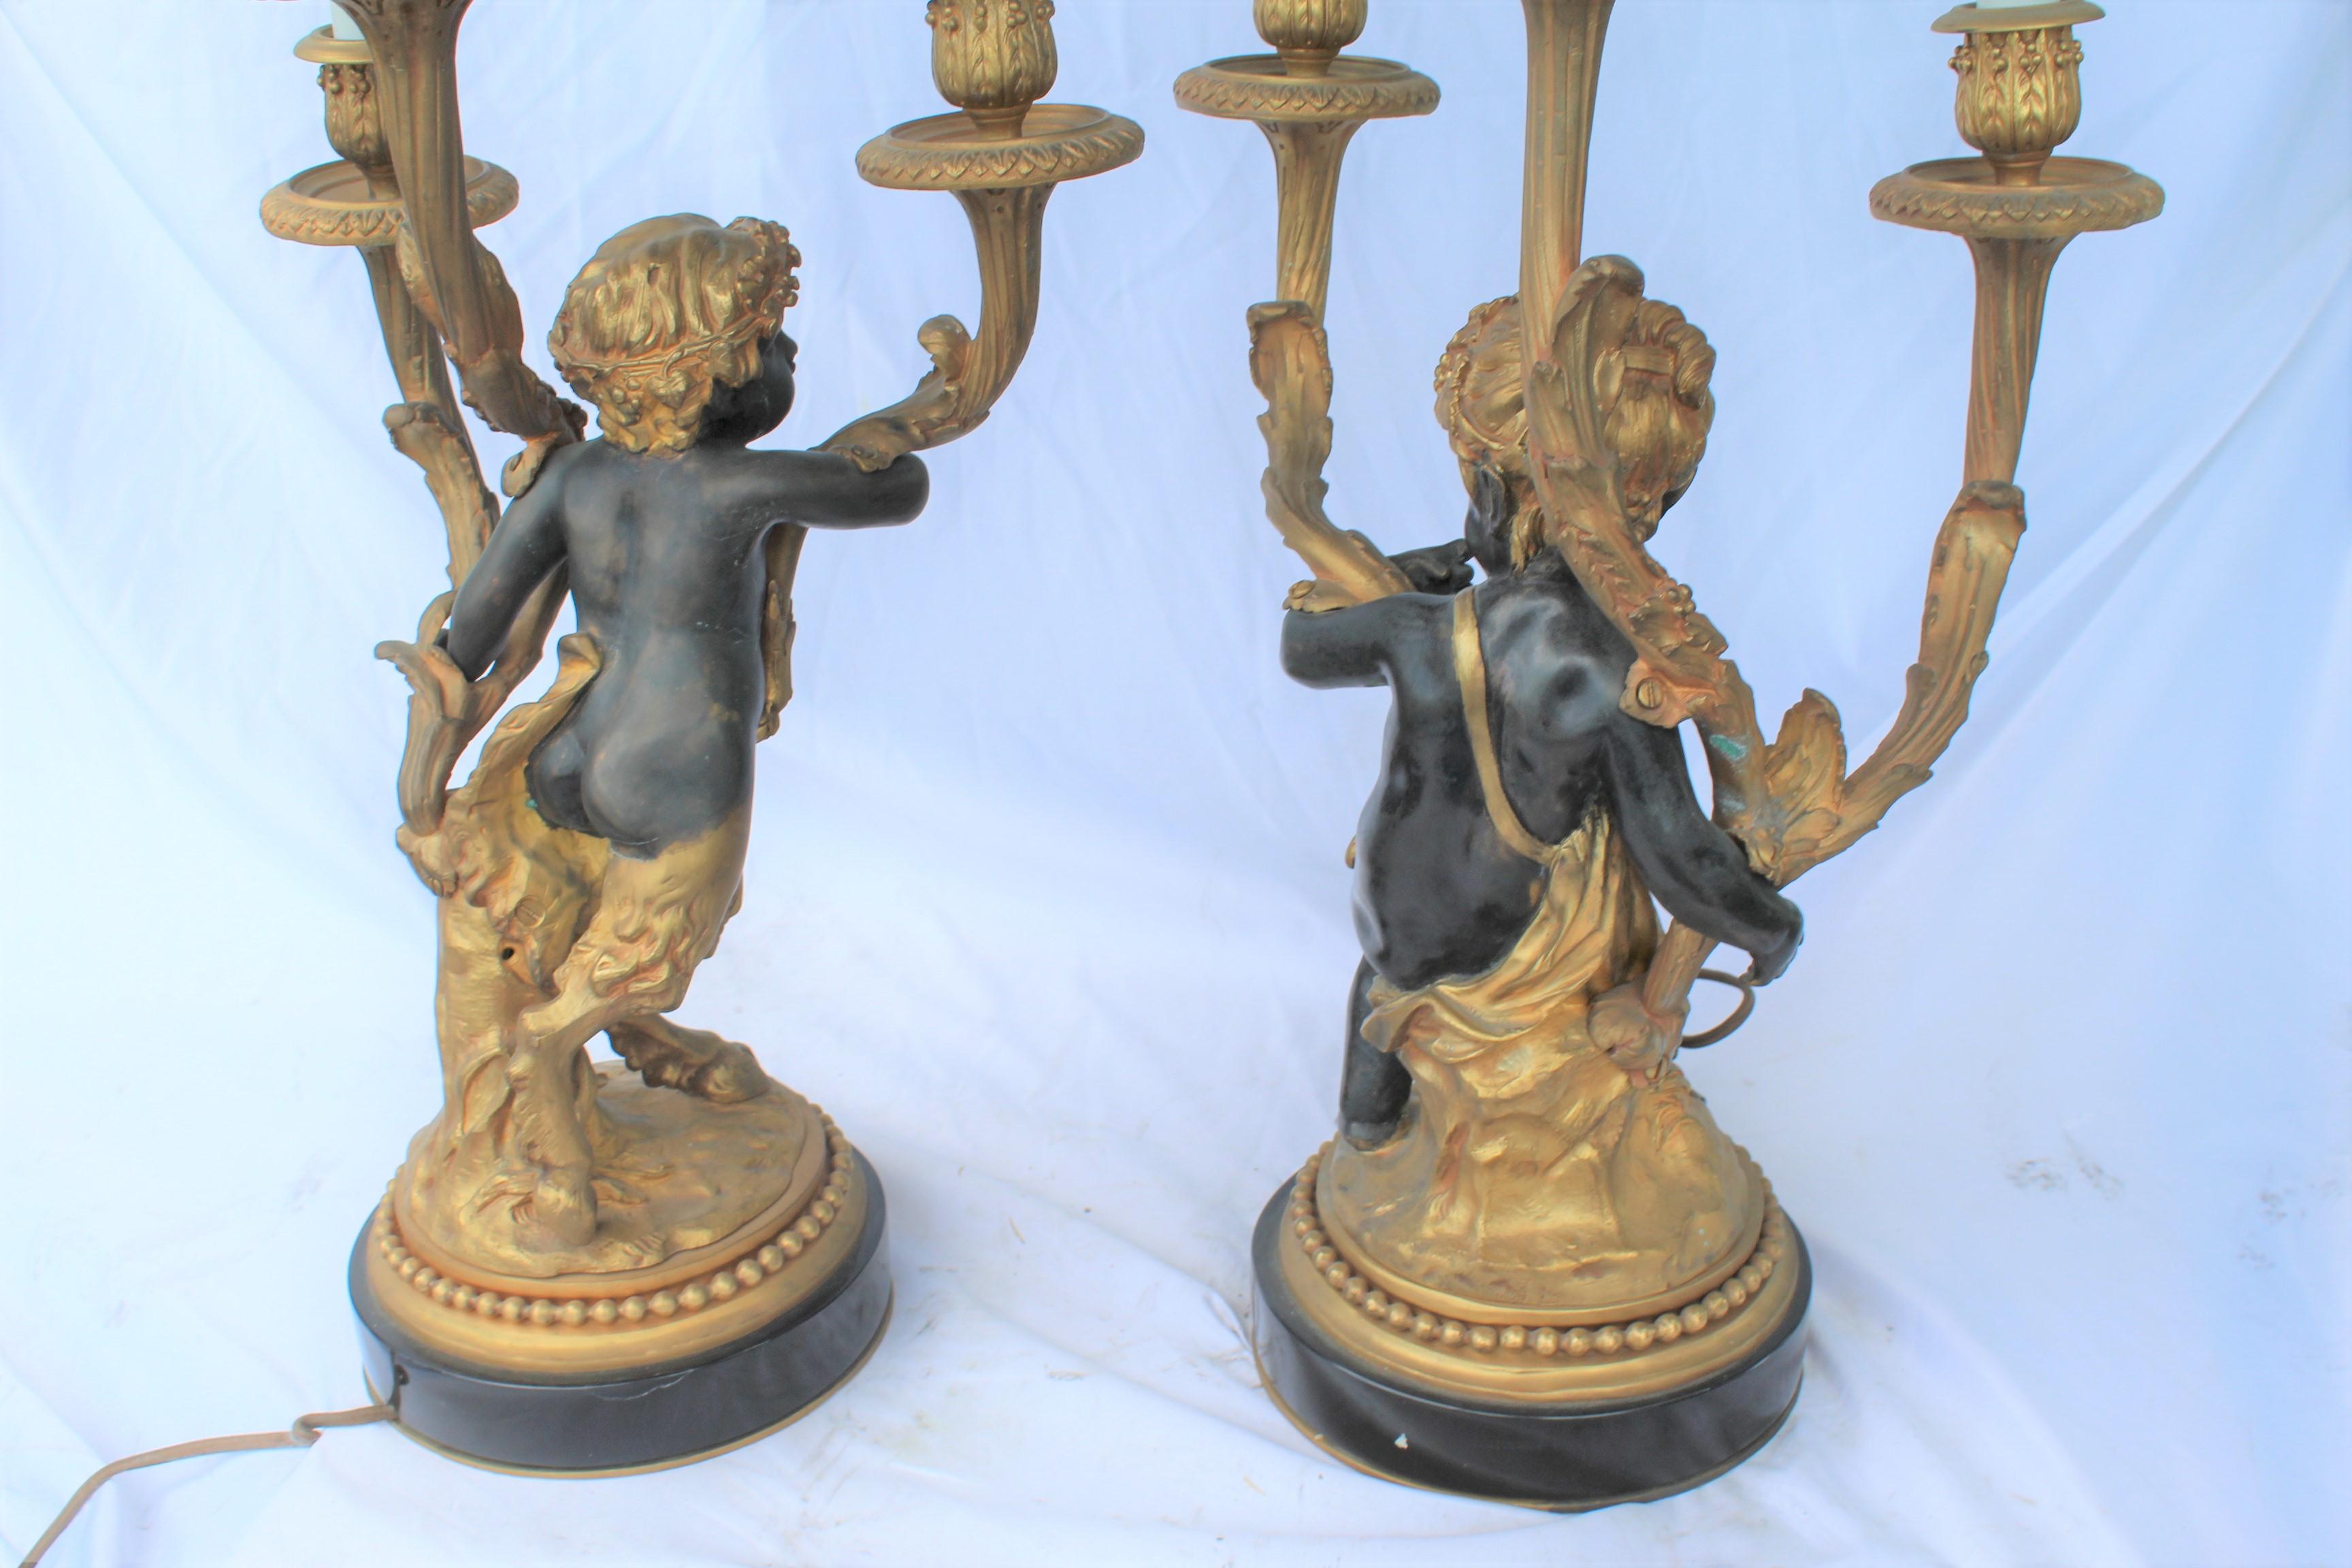 A Fine pair of Cherub candelabras cast in Lost Wax bronze with fine details and black patina and 18-karat Doré gold-plated made  from the originals of Clodion. Wired and ready. Have been held in private bronze collection. Mounted on absolute black